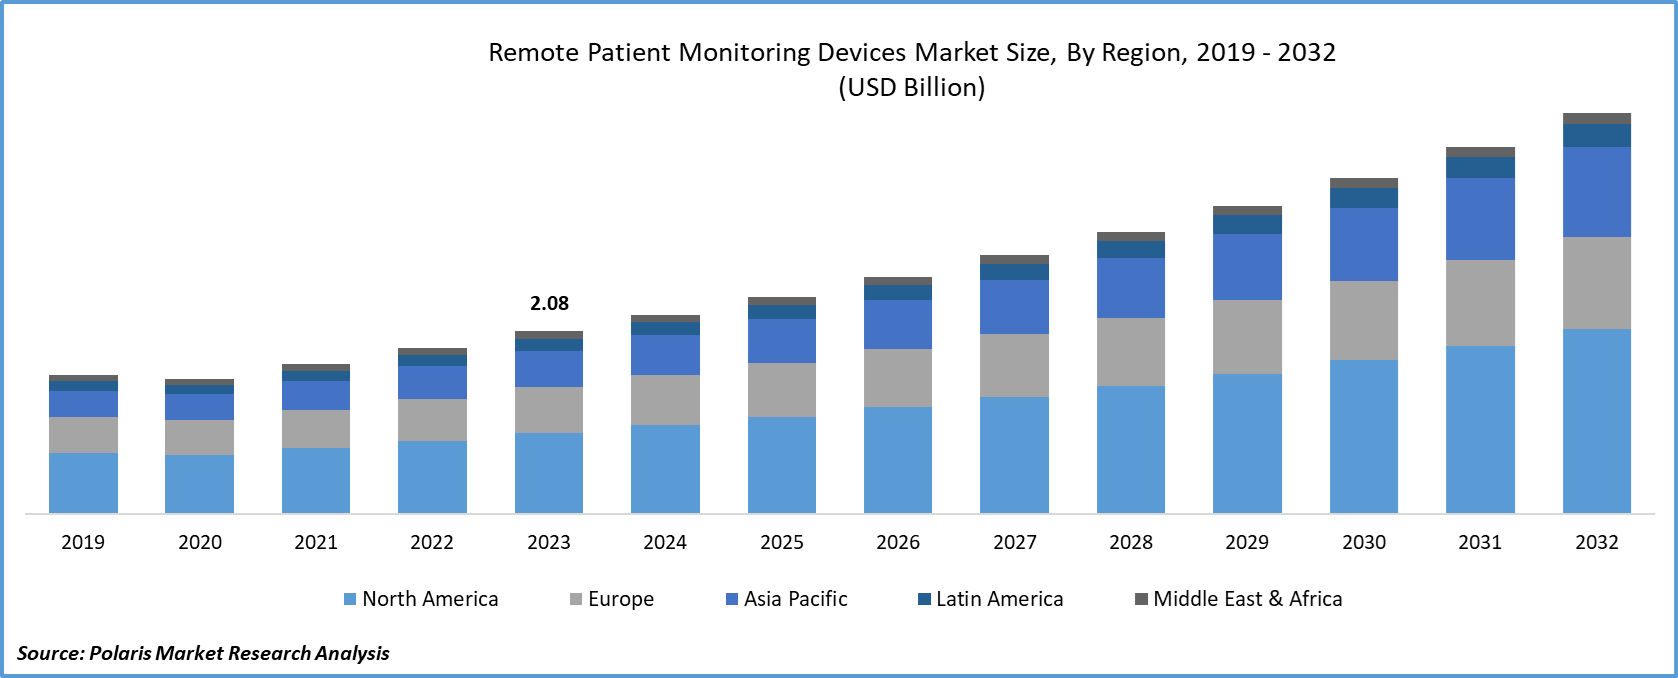 Remote Patient Monitoring Devices Market Size